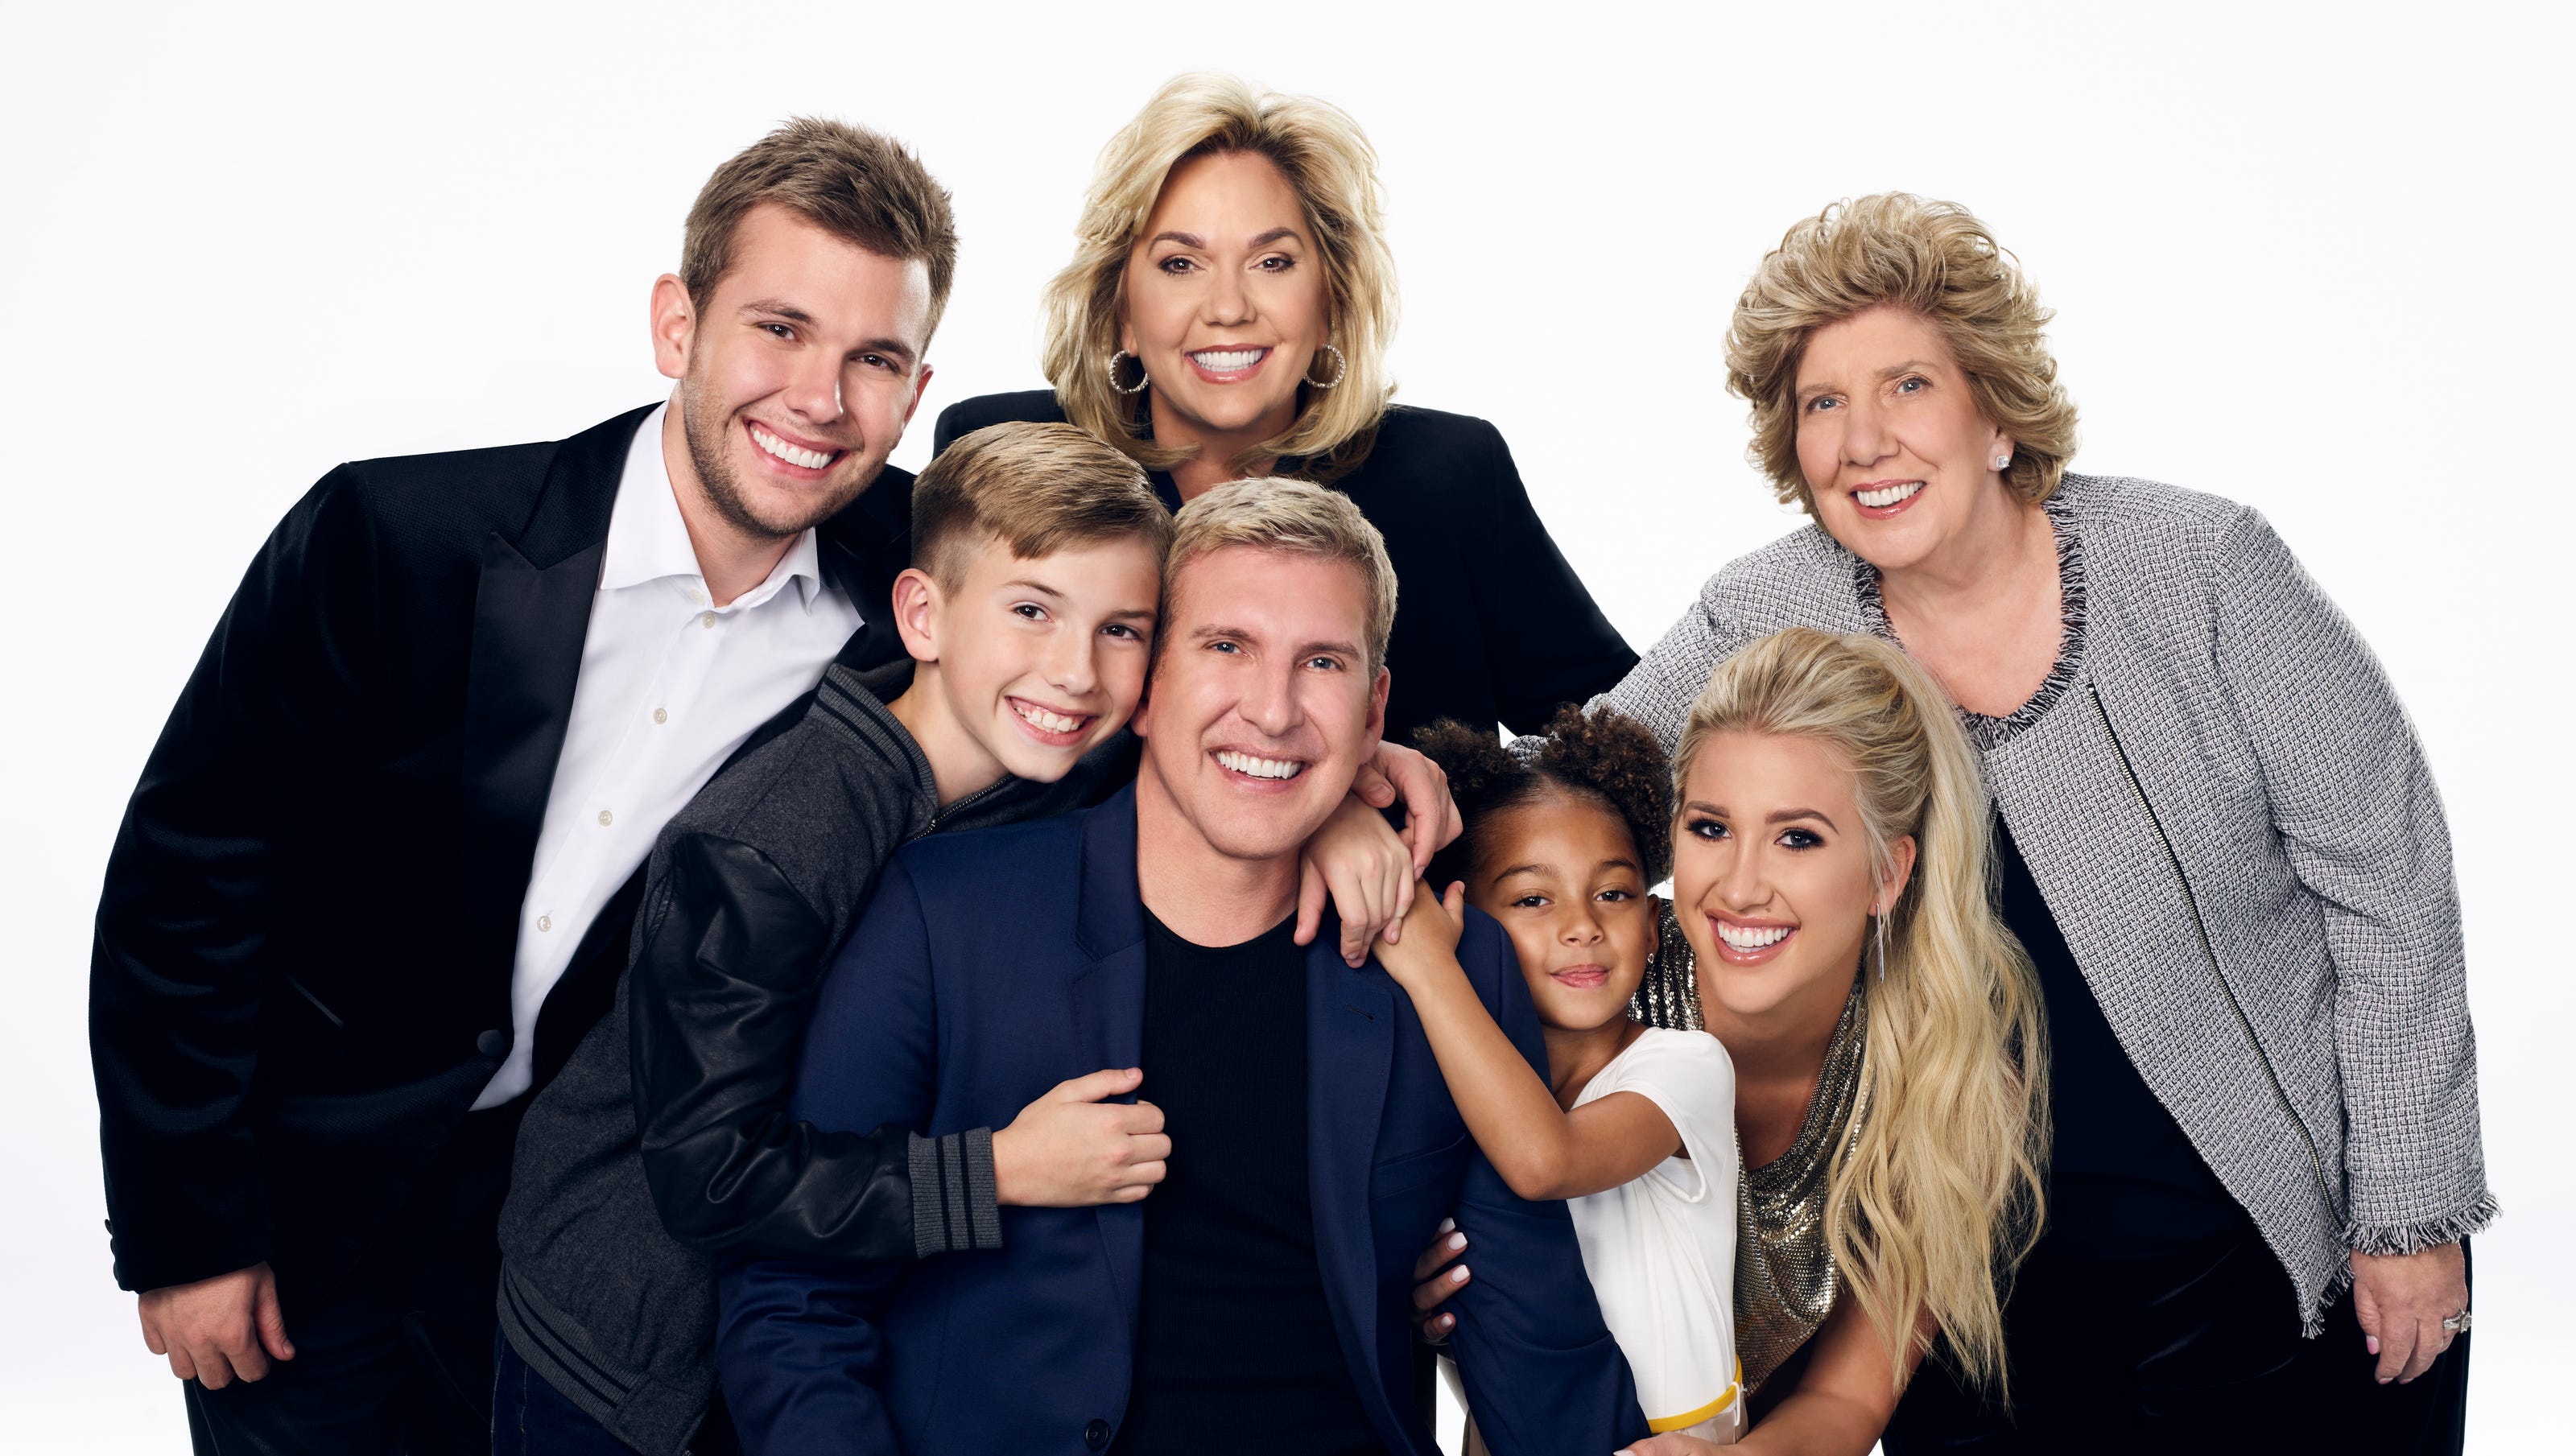 Todd and Julie Chrisley from 'Chrisley Knows Best' talk about granddaughter Chloe